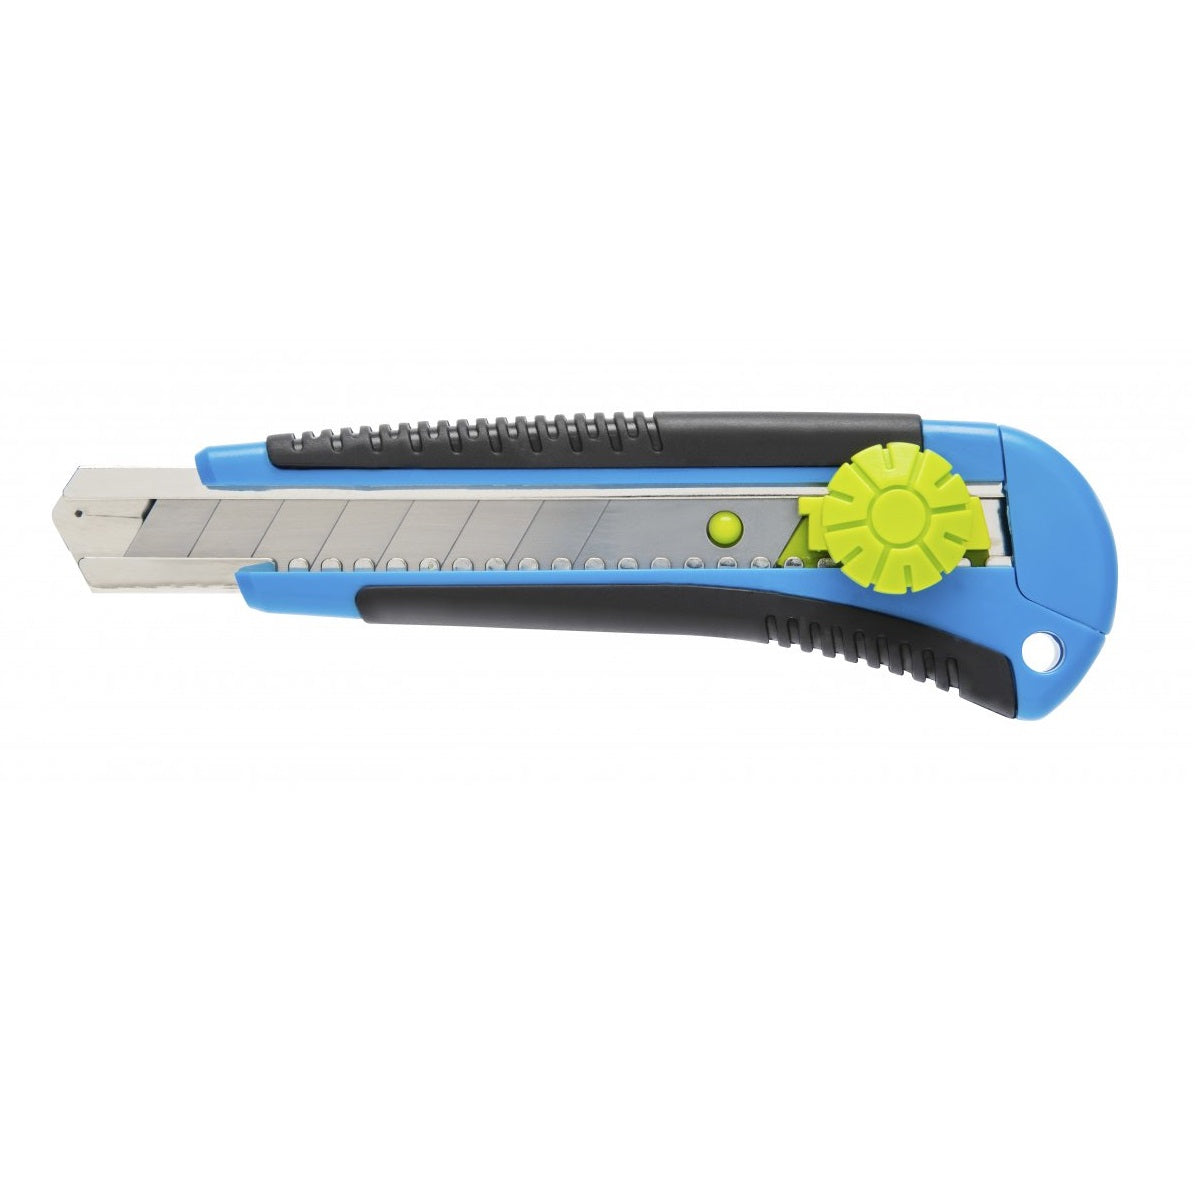 Hoegert Technik Snap-Off Blade Knife 18mm with Screw Lock System HT4C605 (Pack of 5)